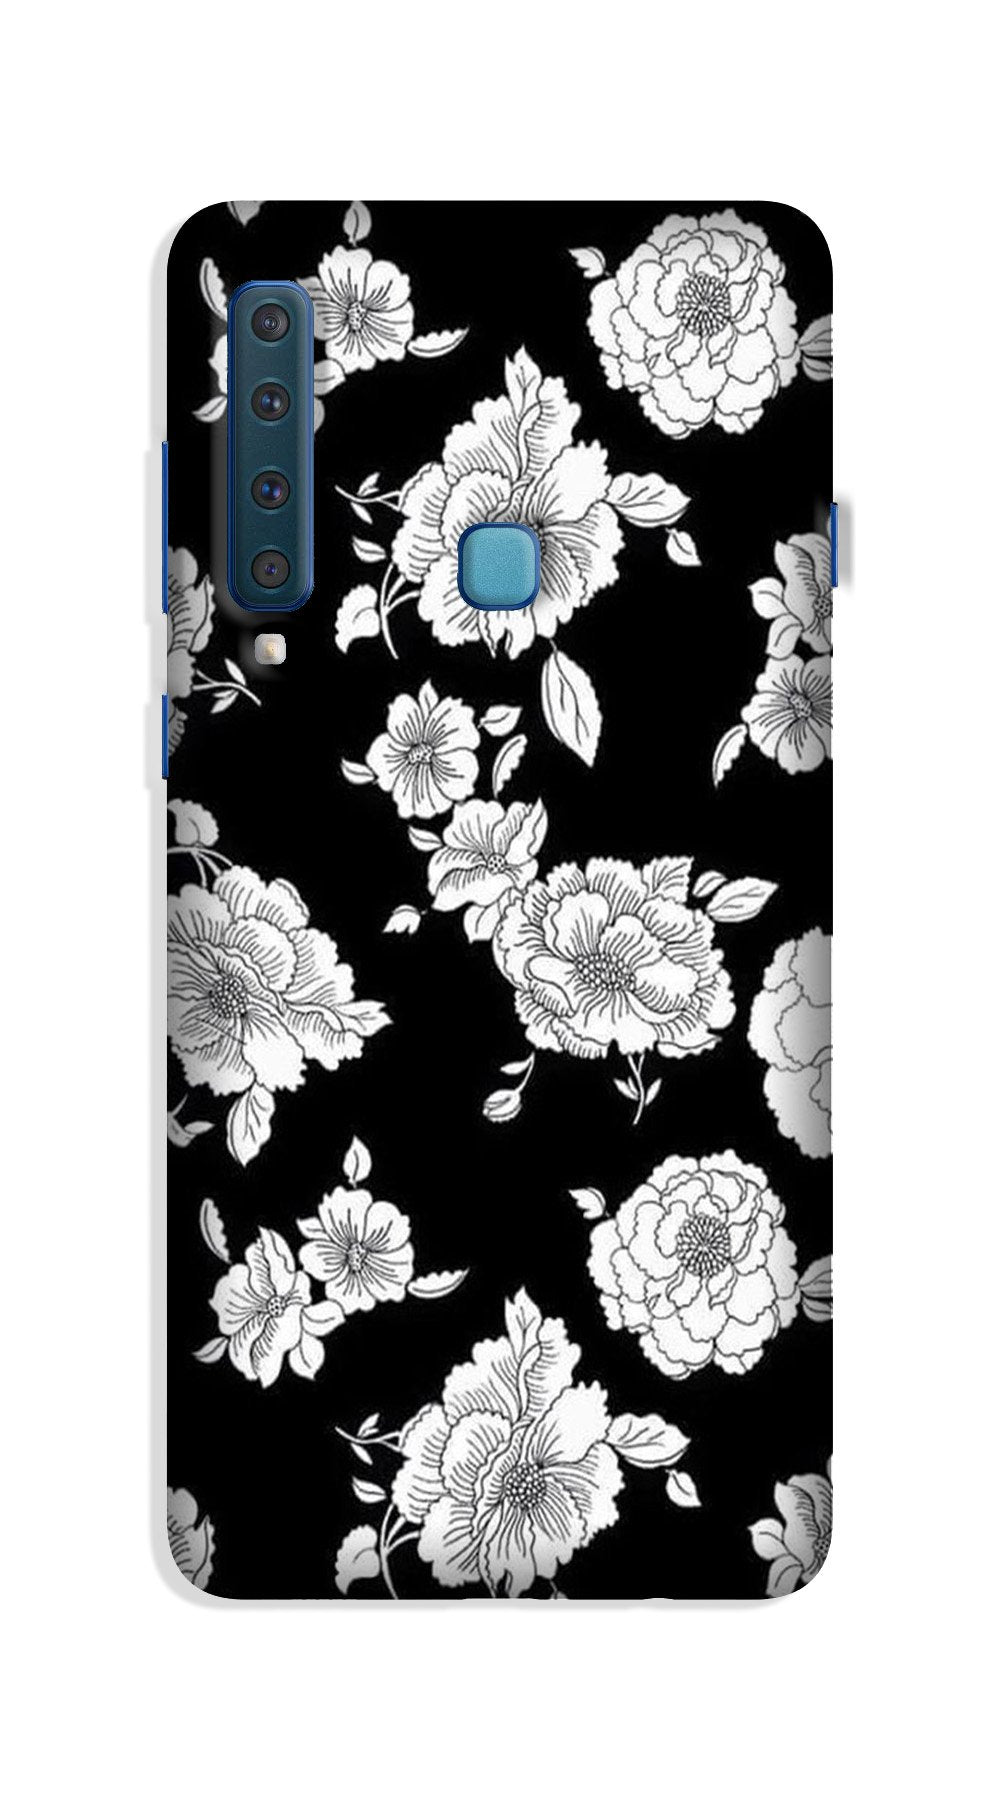 White flowers Black Background Case for Galaxy A9 (2018)